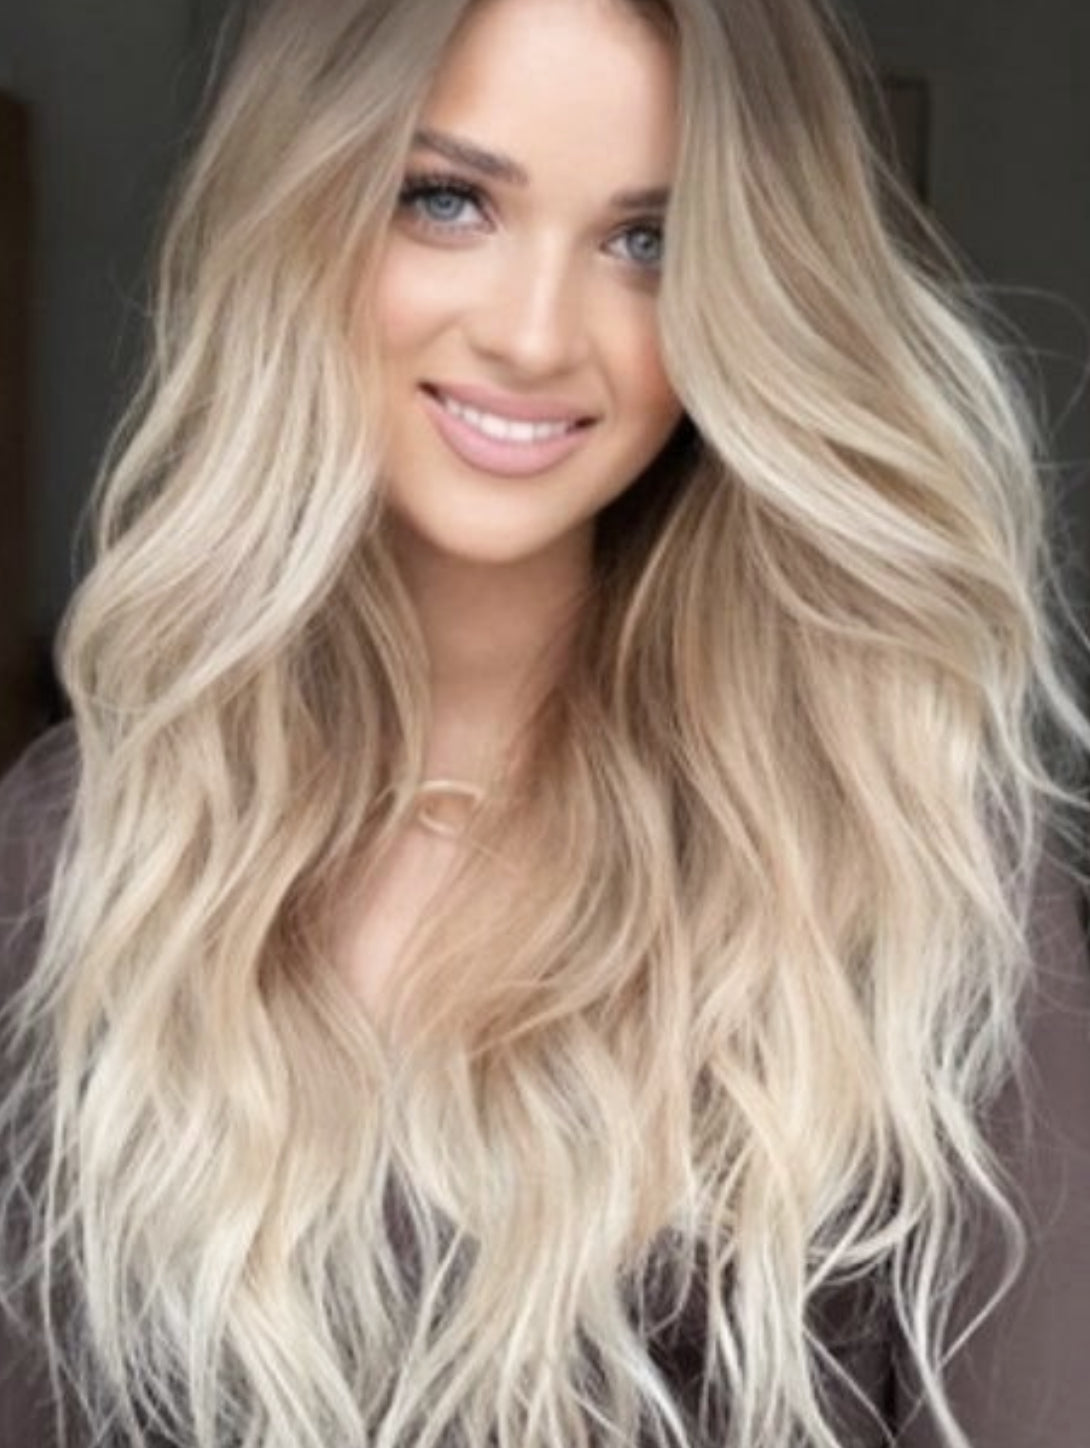 #6b/613/60 ASH BLONDE HIGHLIGHTS BALAYAGE CLIP IN HAIR EXTENSIONS